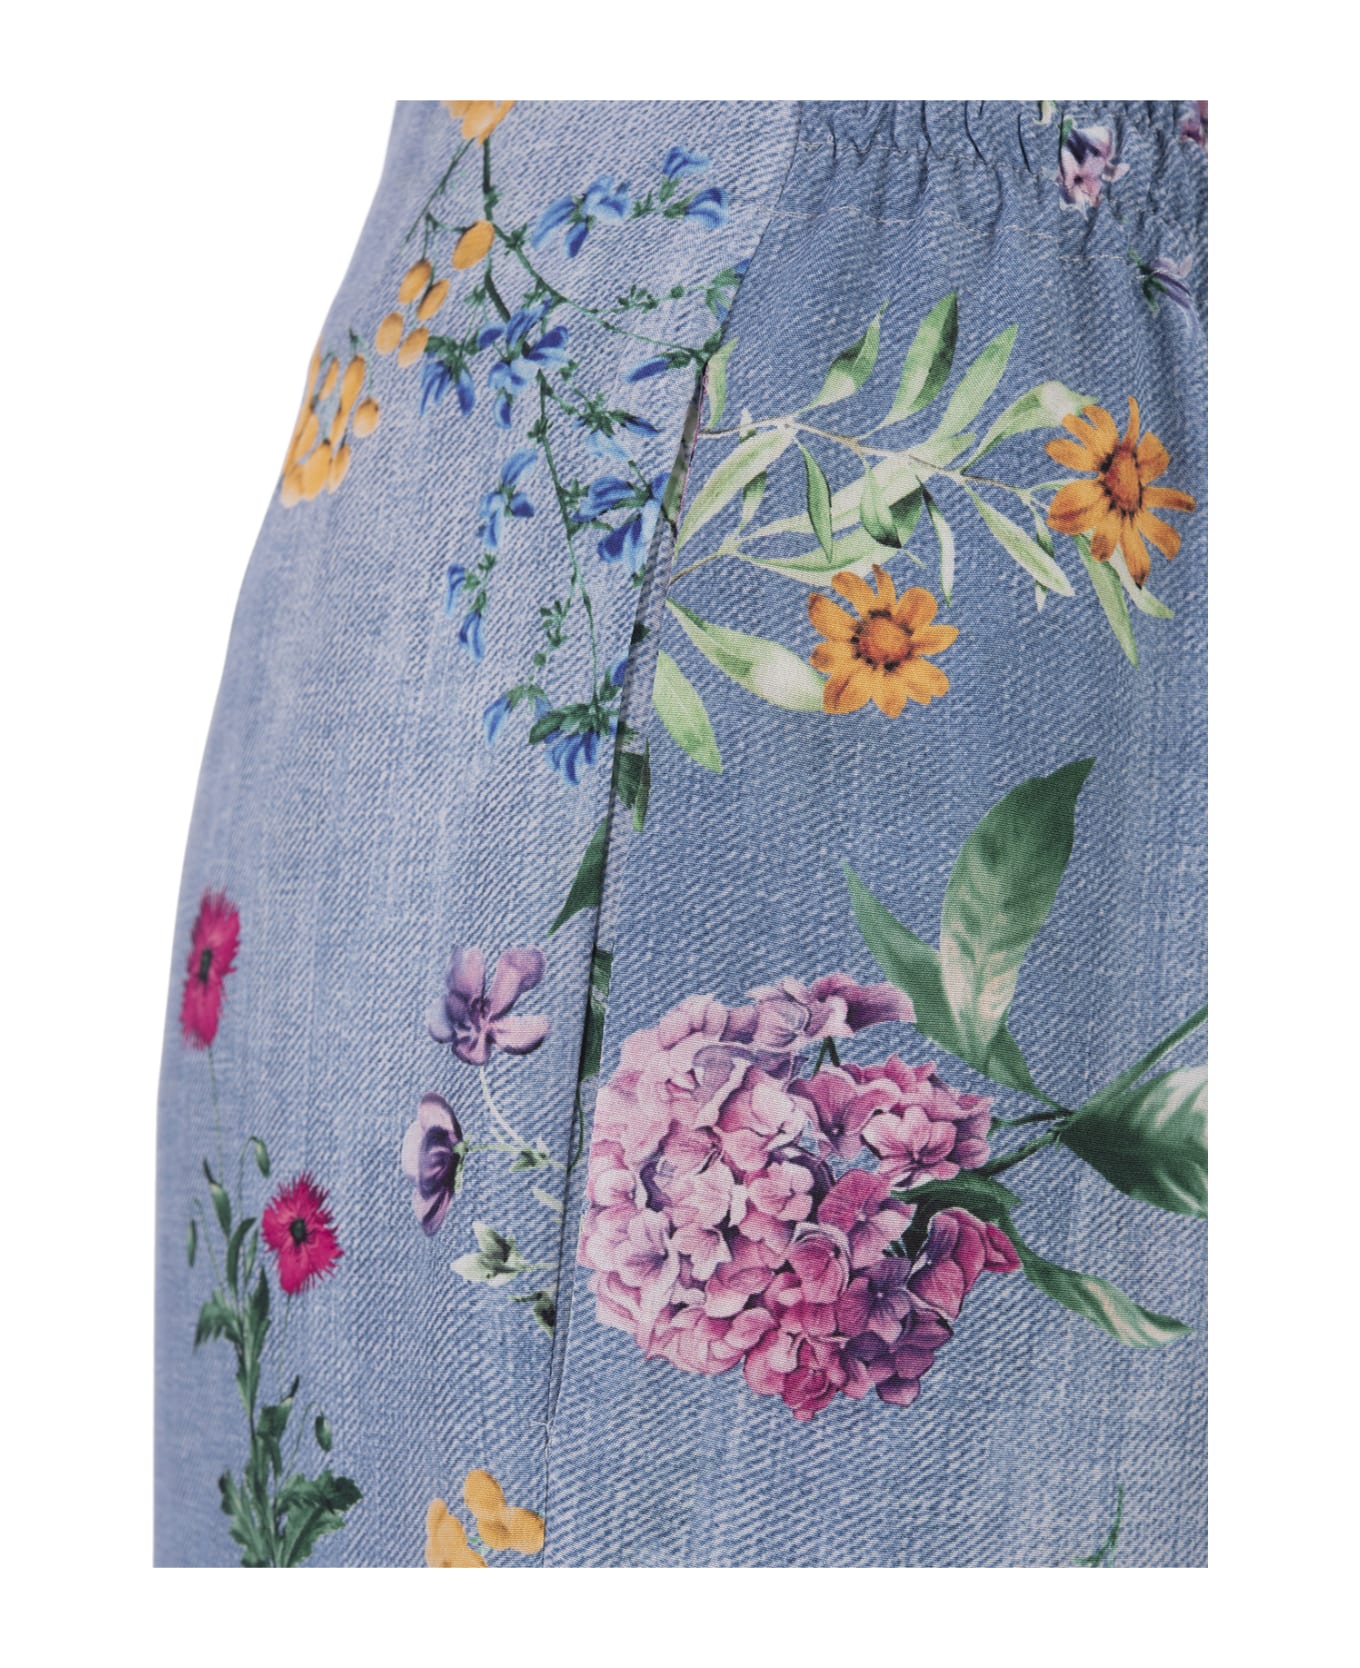 Ermanno Scervino Palazzo Joggers With Floral Print - Blue ボトムス